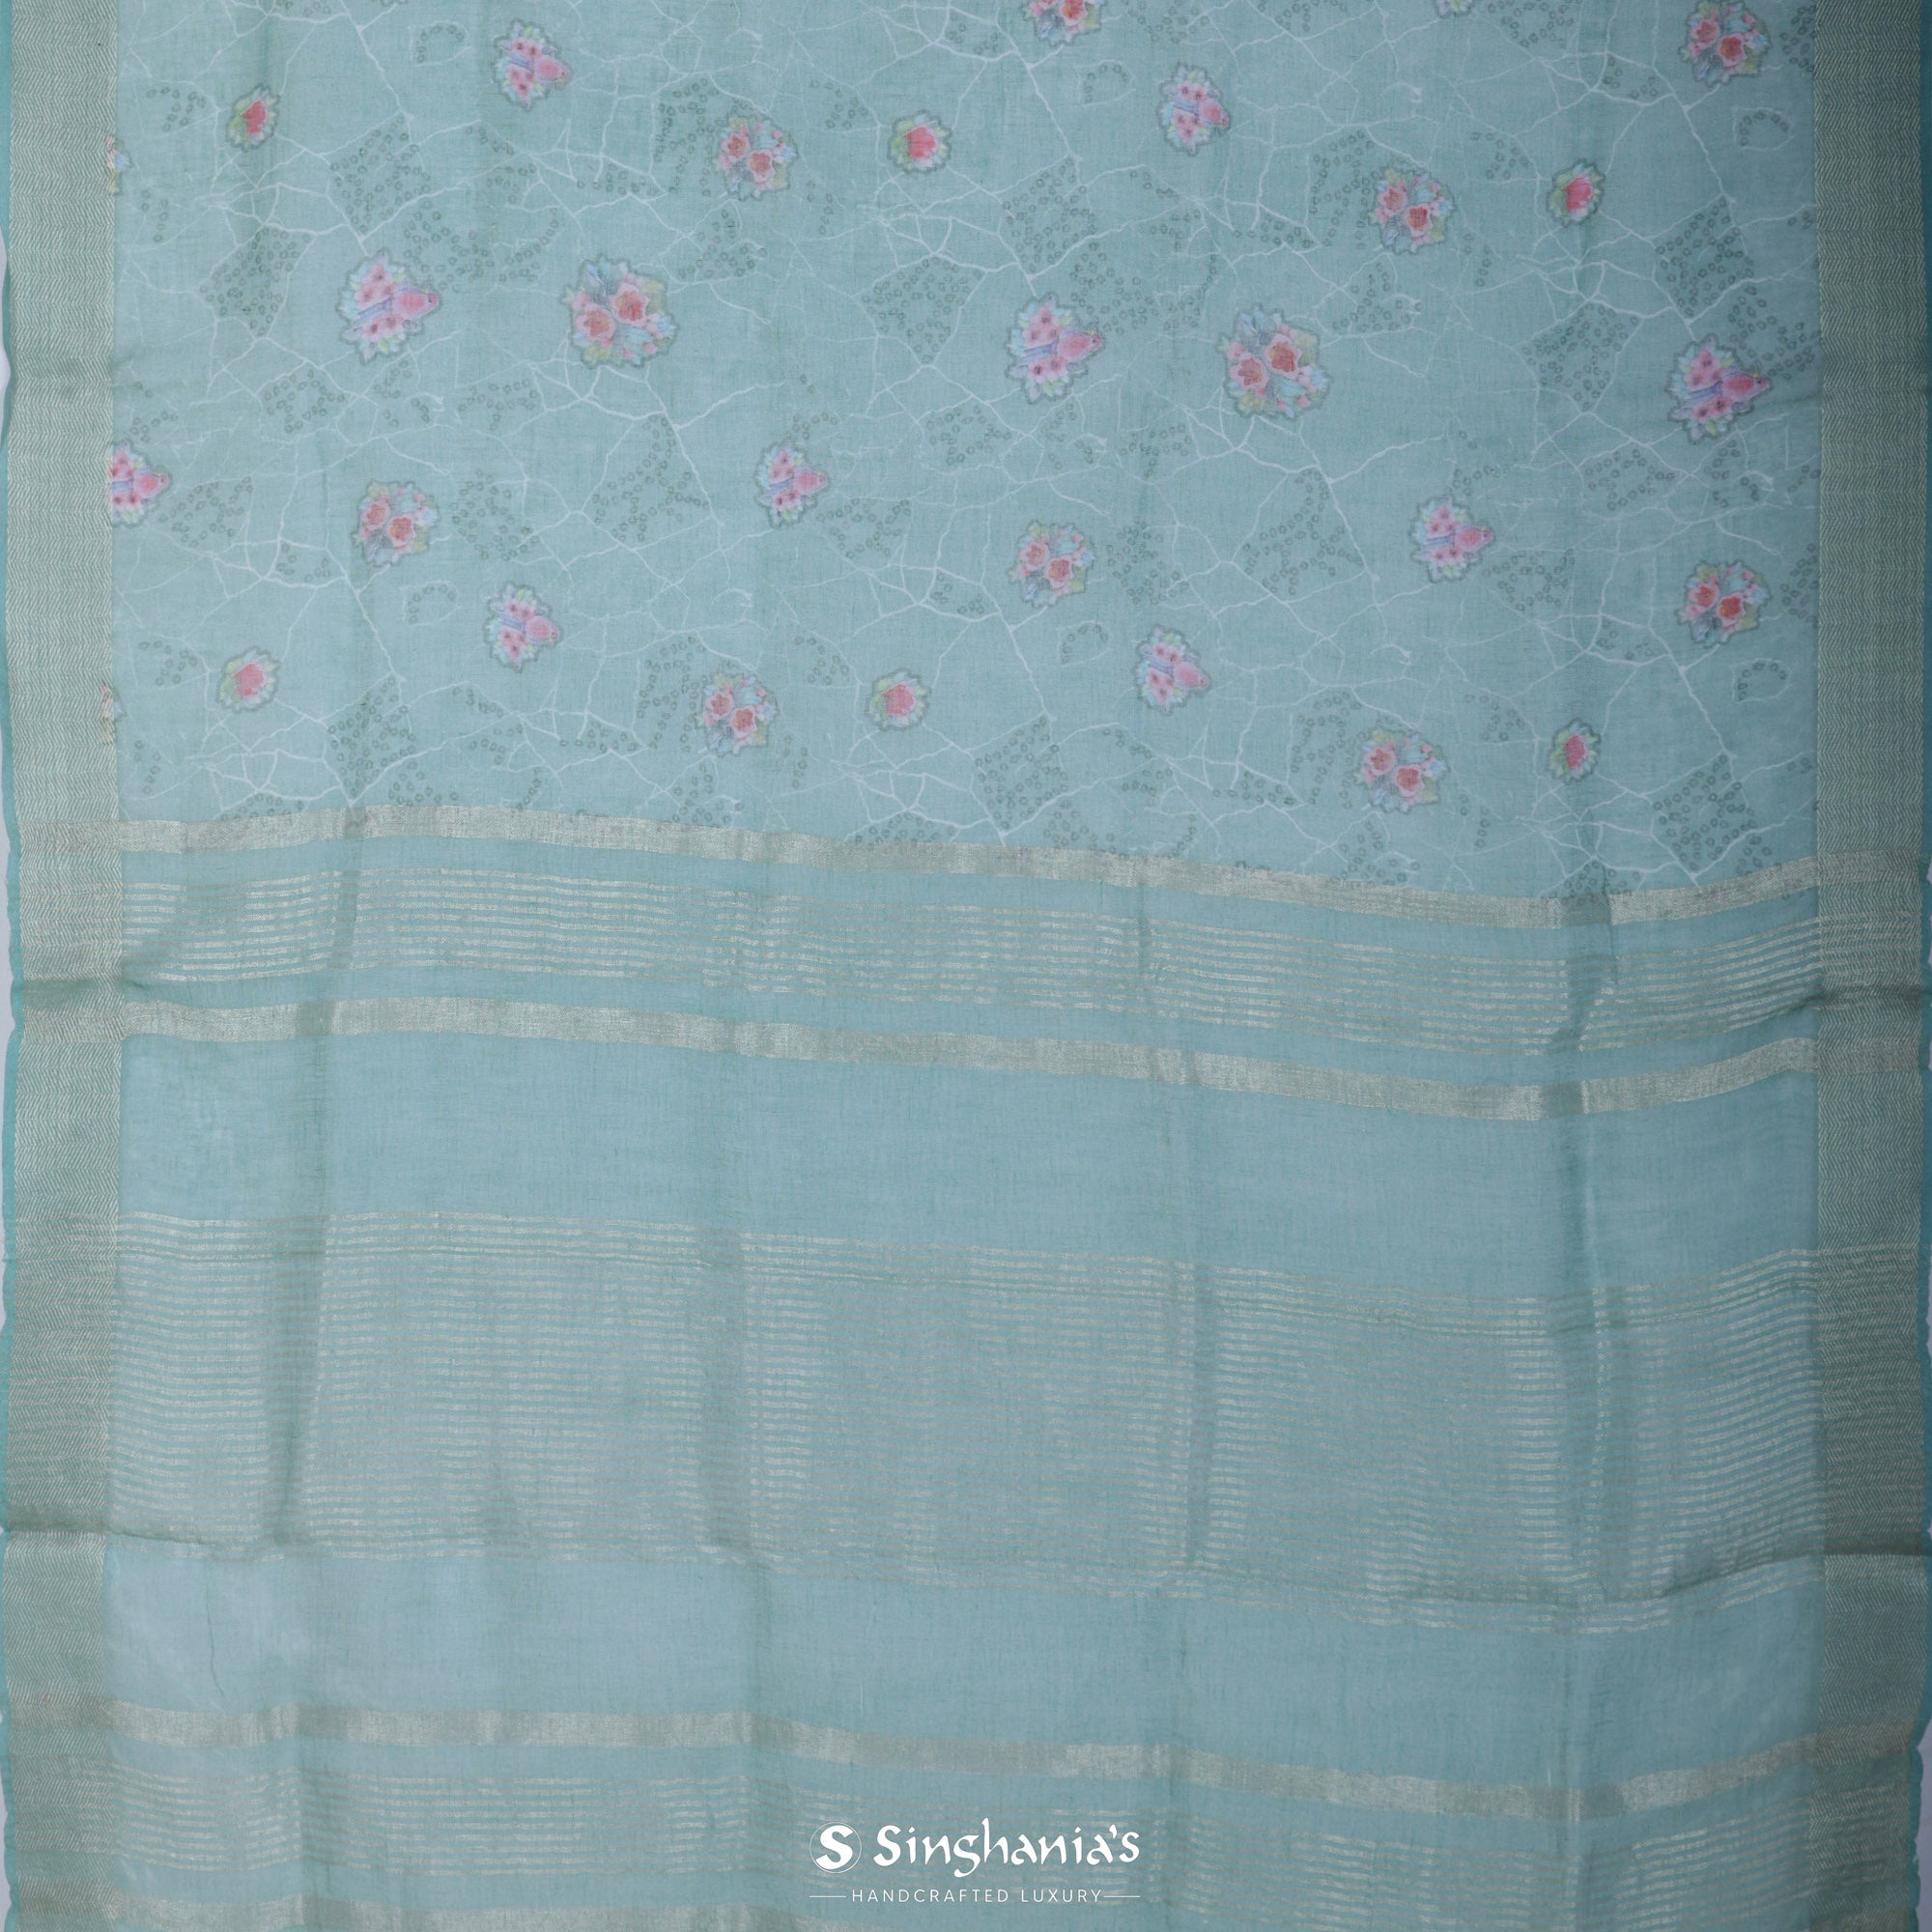 Turkish Blue Printed Linen Saree With Floral Jaal Pattern